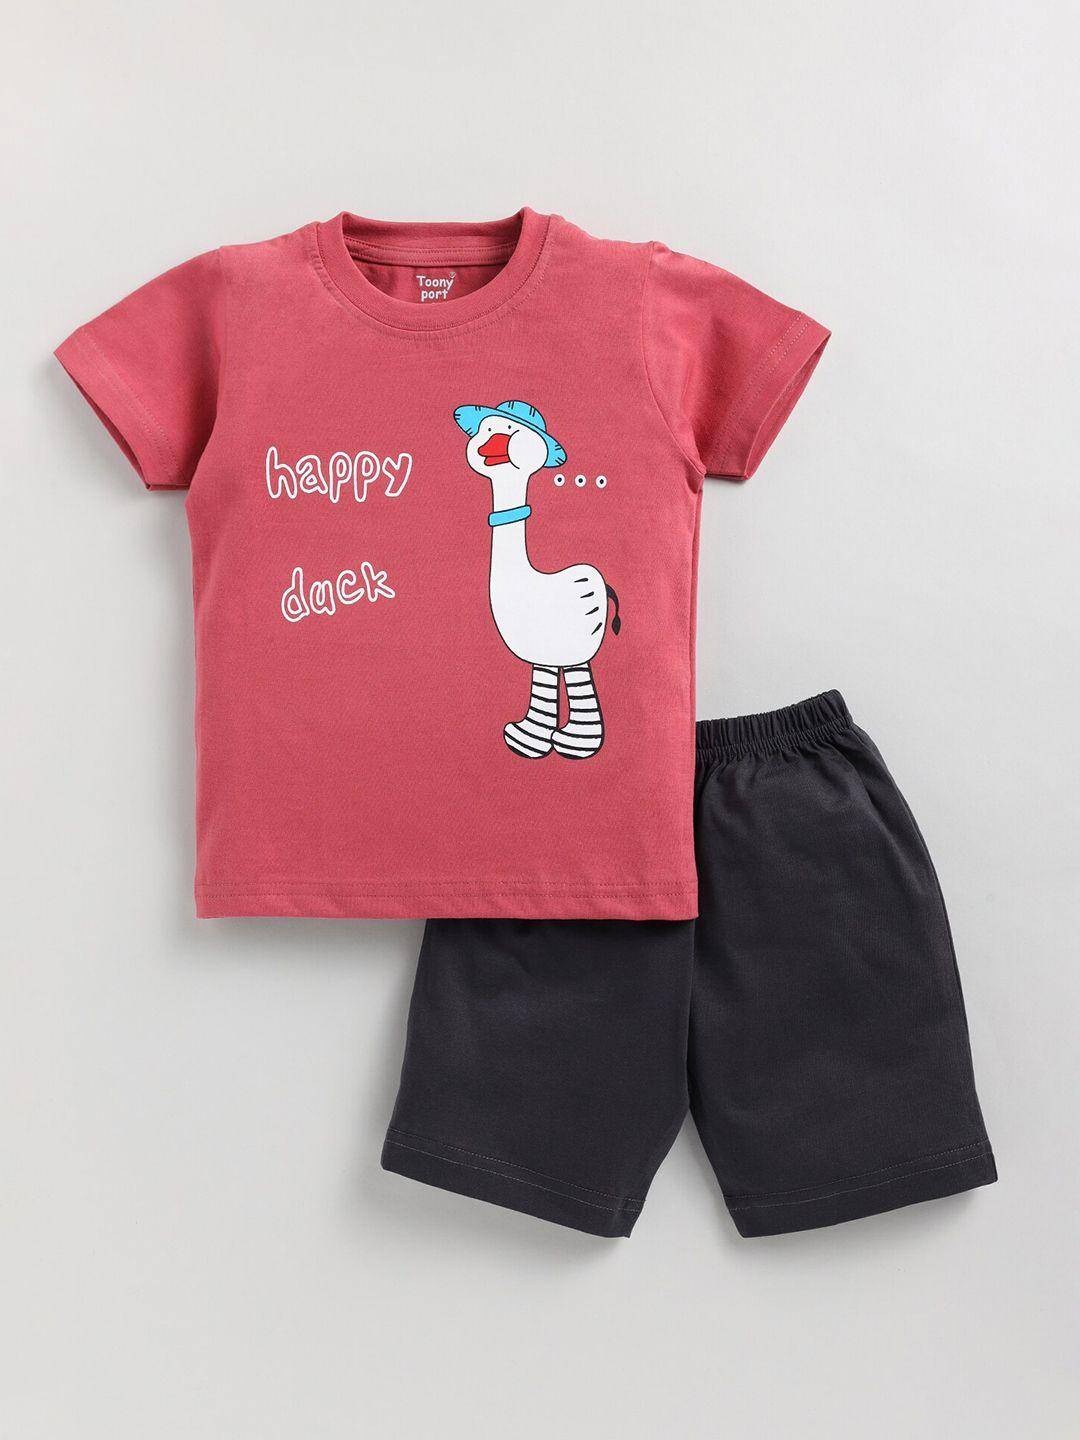 toonyport-boys-printed-cotton-t-shirt-with-shorts